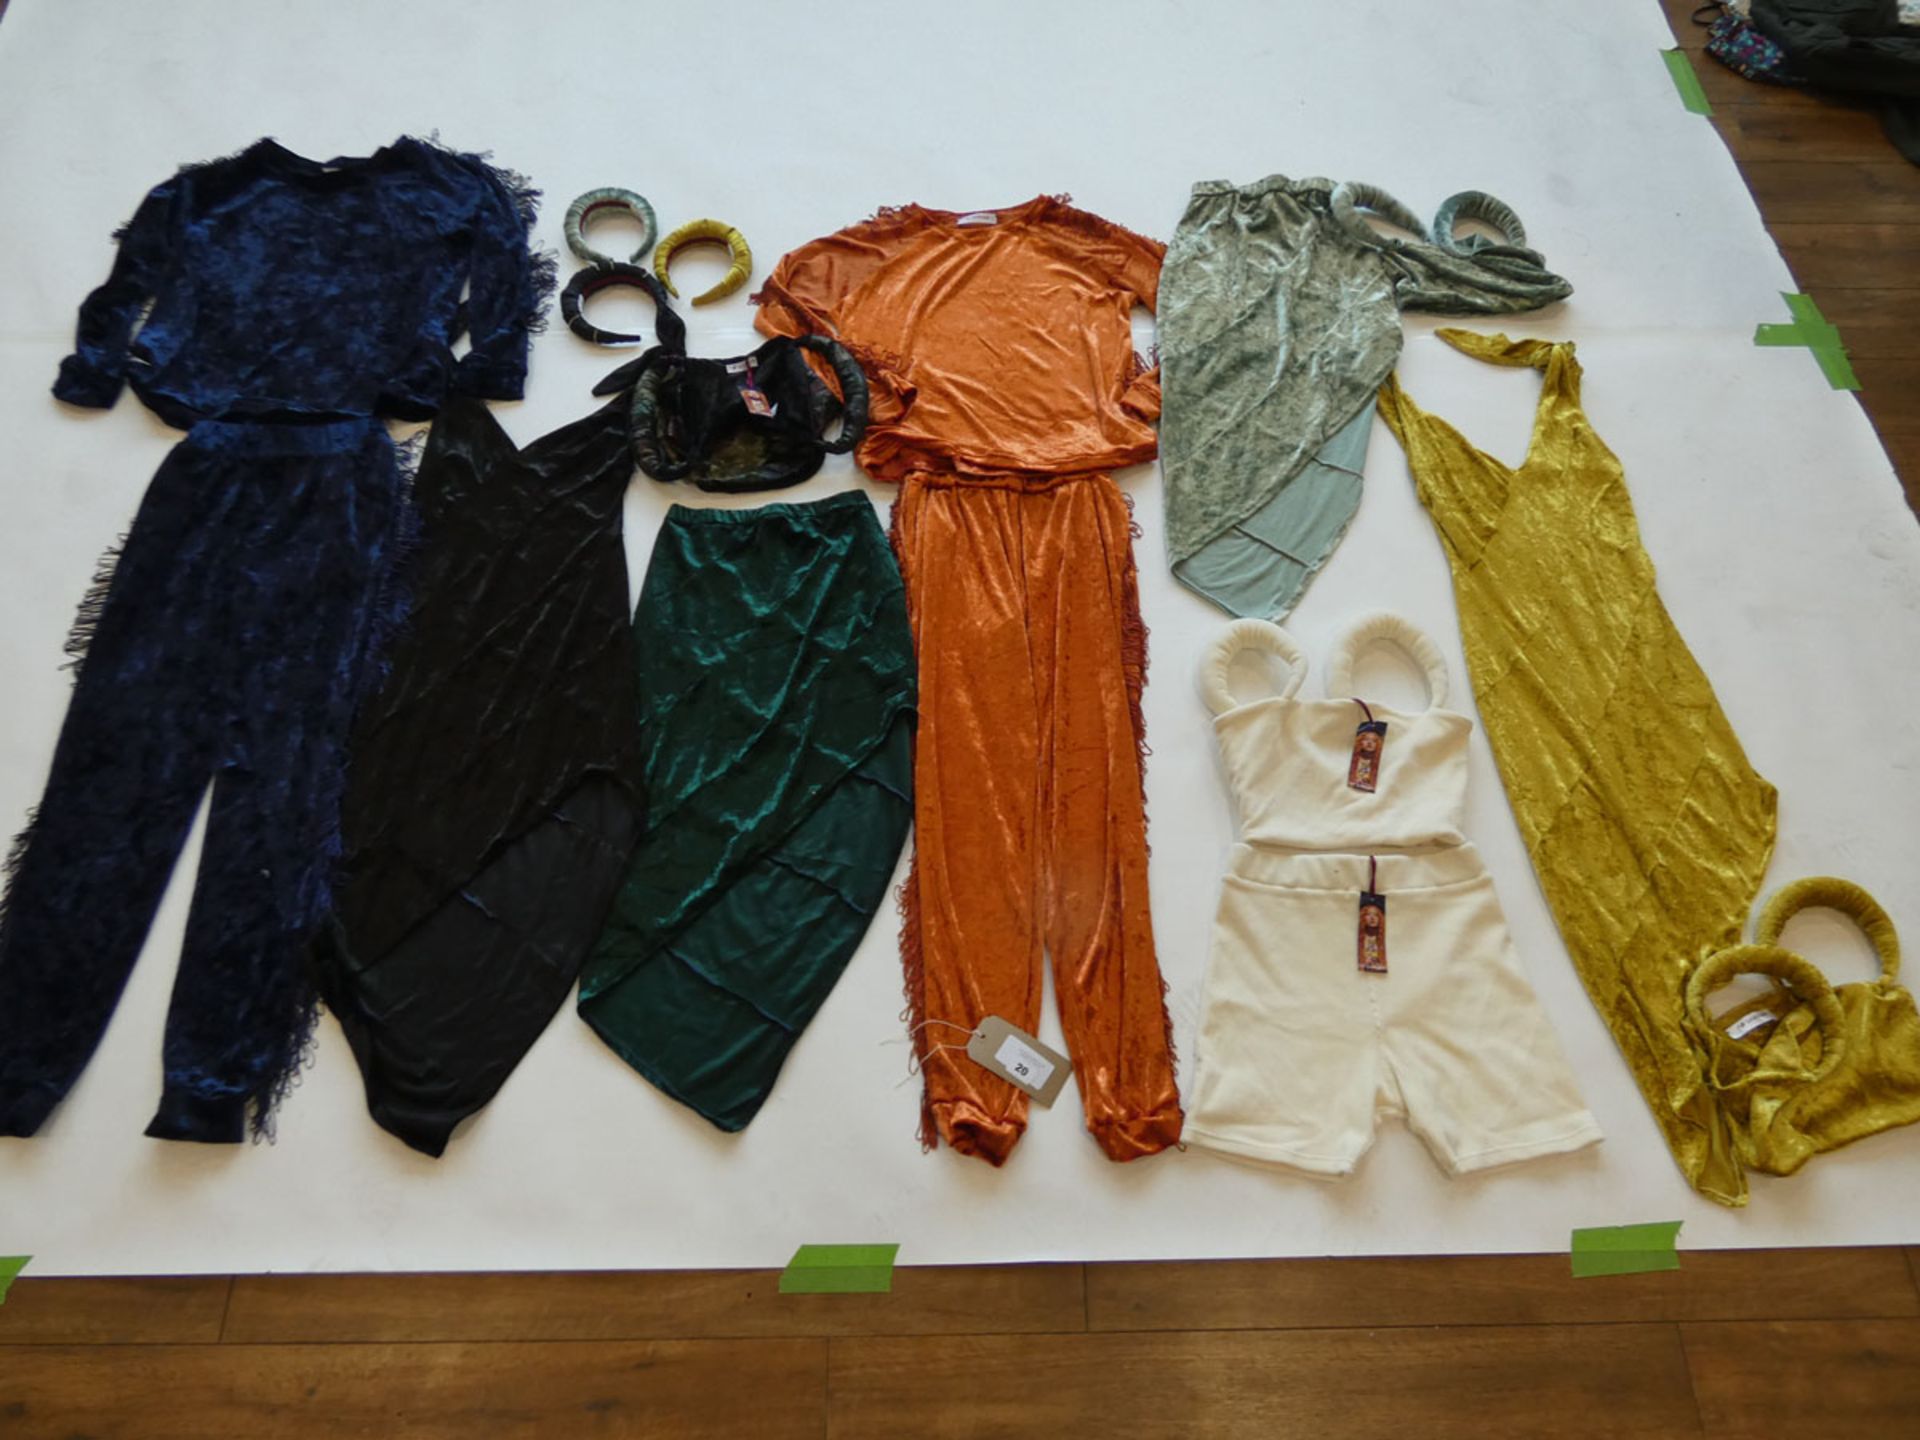 Selection of No Wallflower Project clothing to include tops, trousers, skirt, headbands, etc (